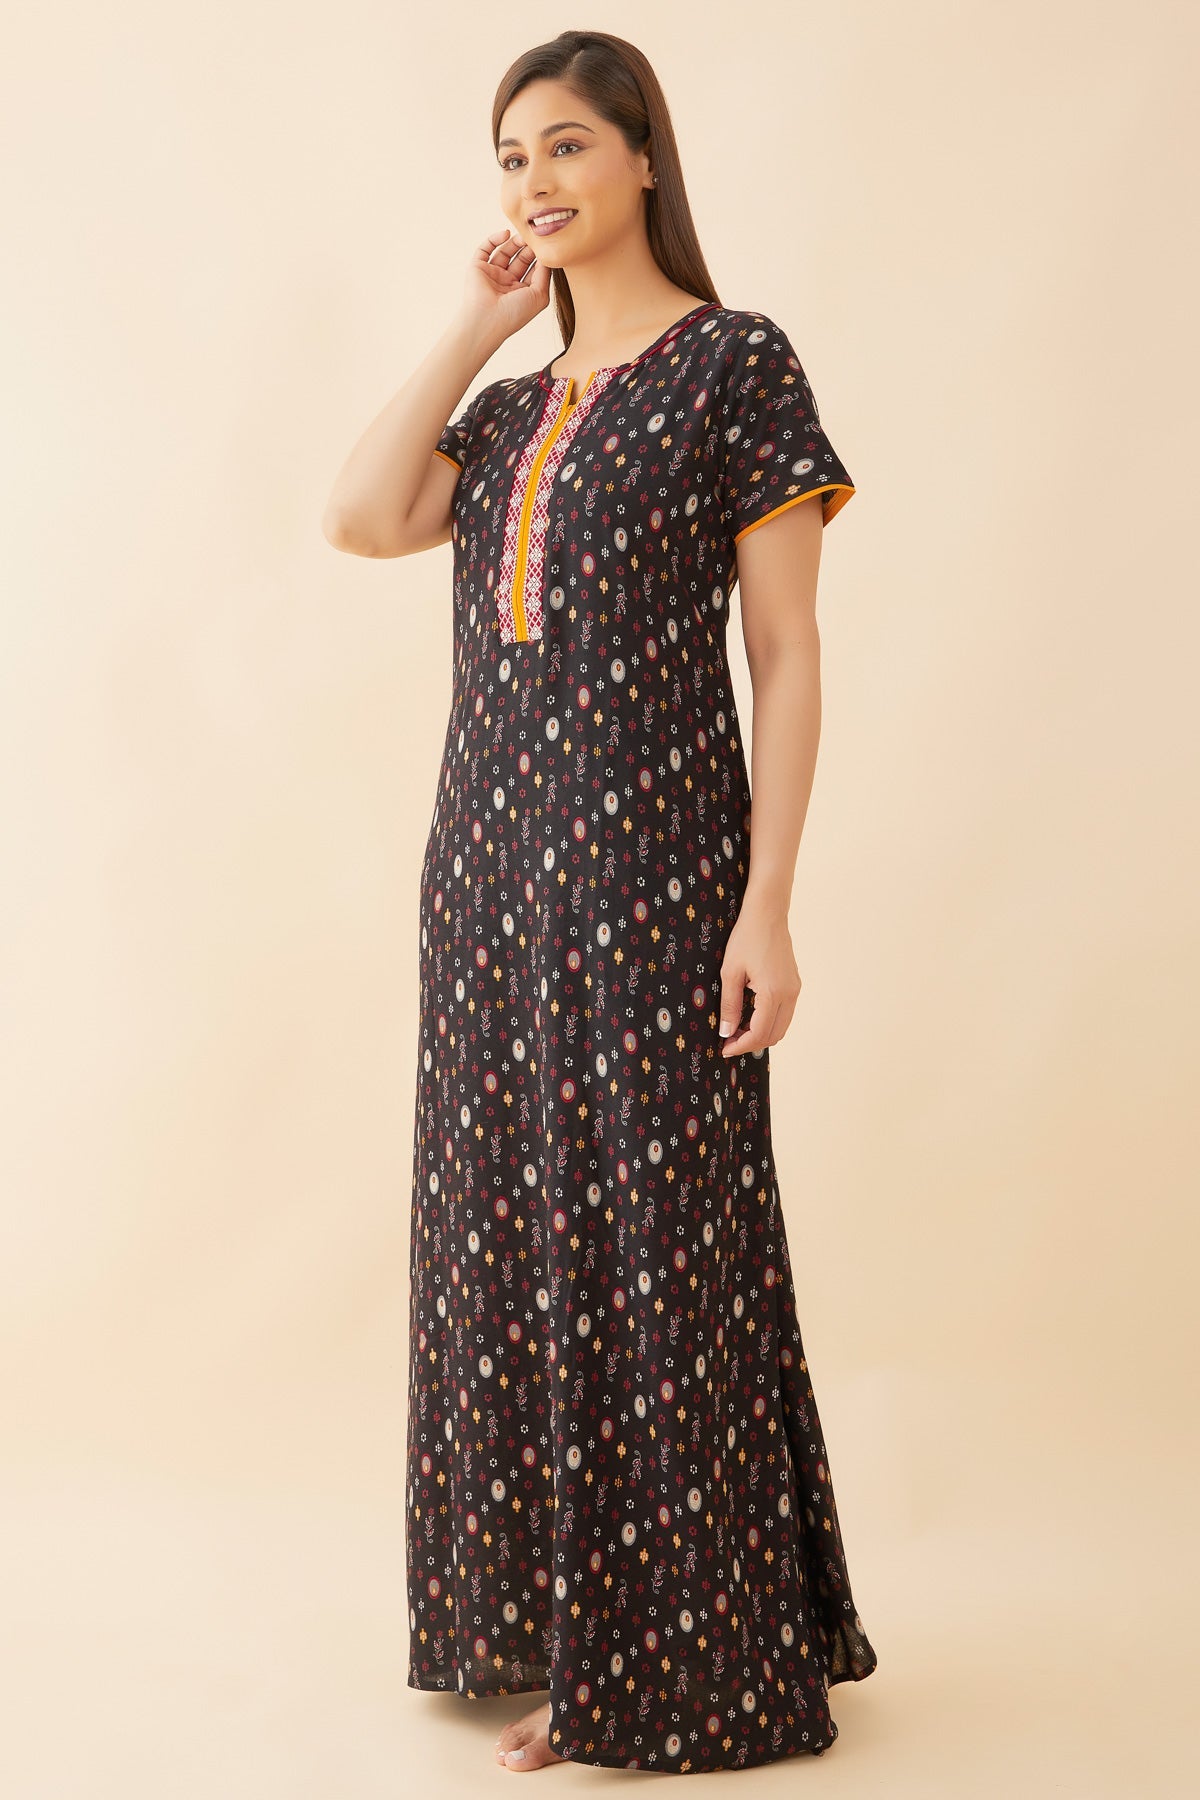 All Over Geometric Print With Contrast Embroidered Yoke Nighty - Black